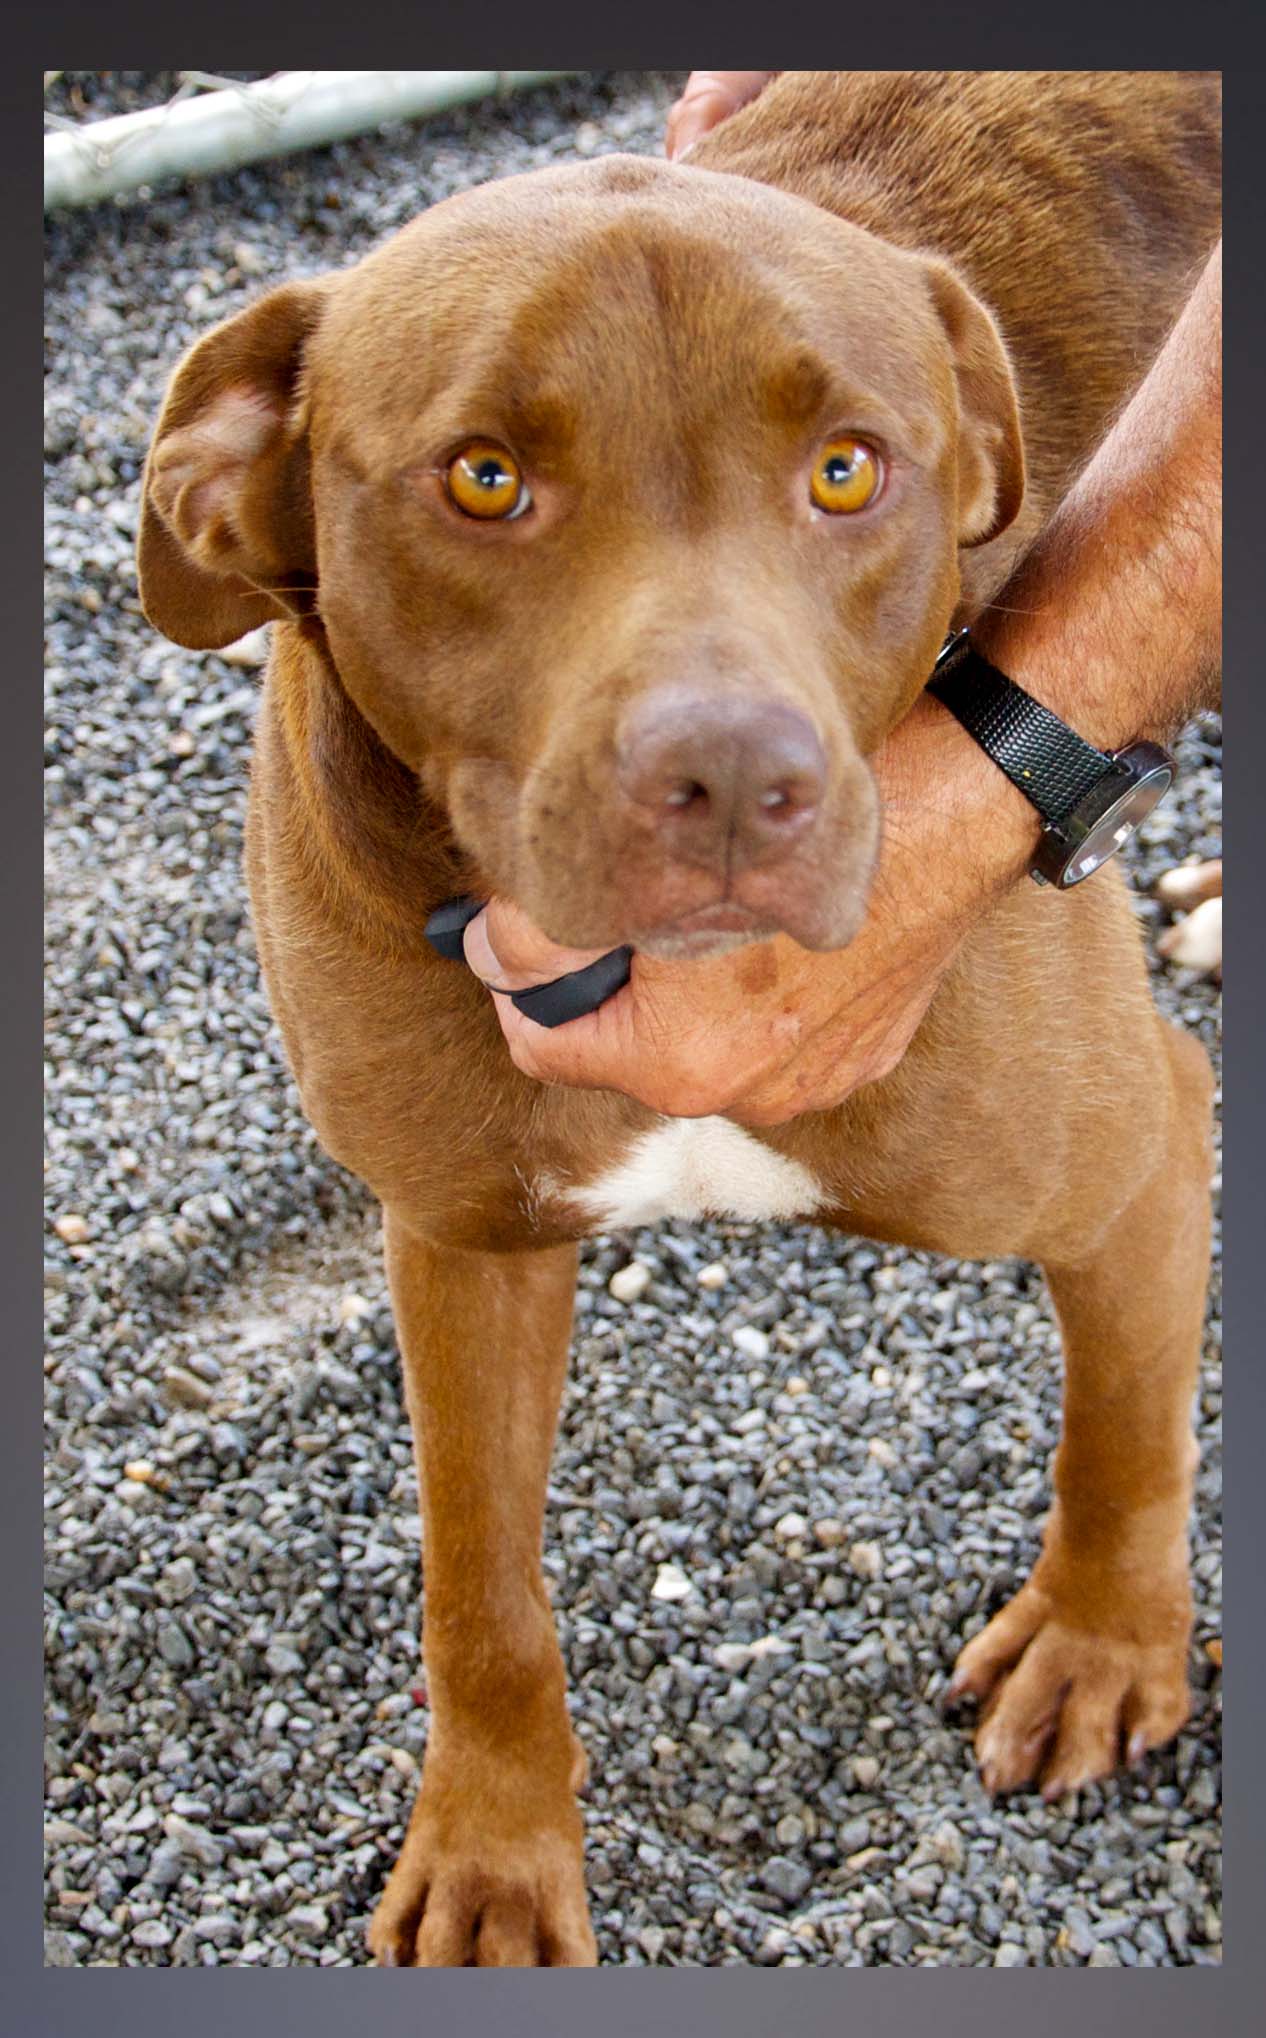 This male mix was surrendered by his owner August 4. He has a chocolate coat with light brown eyes. View this sweetie using intake number 280-21.